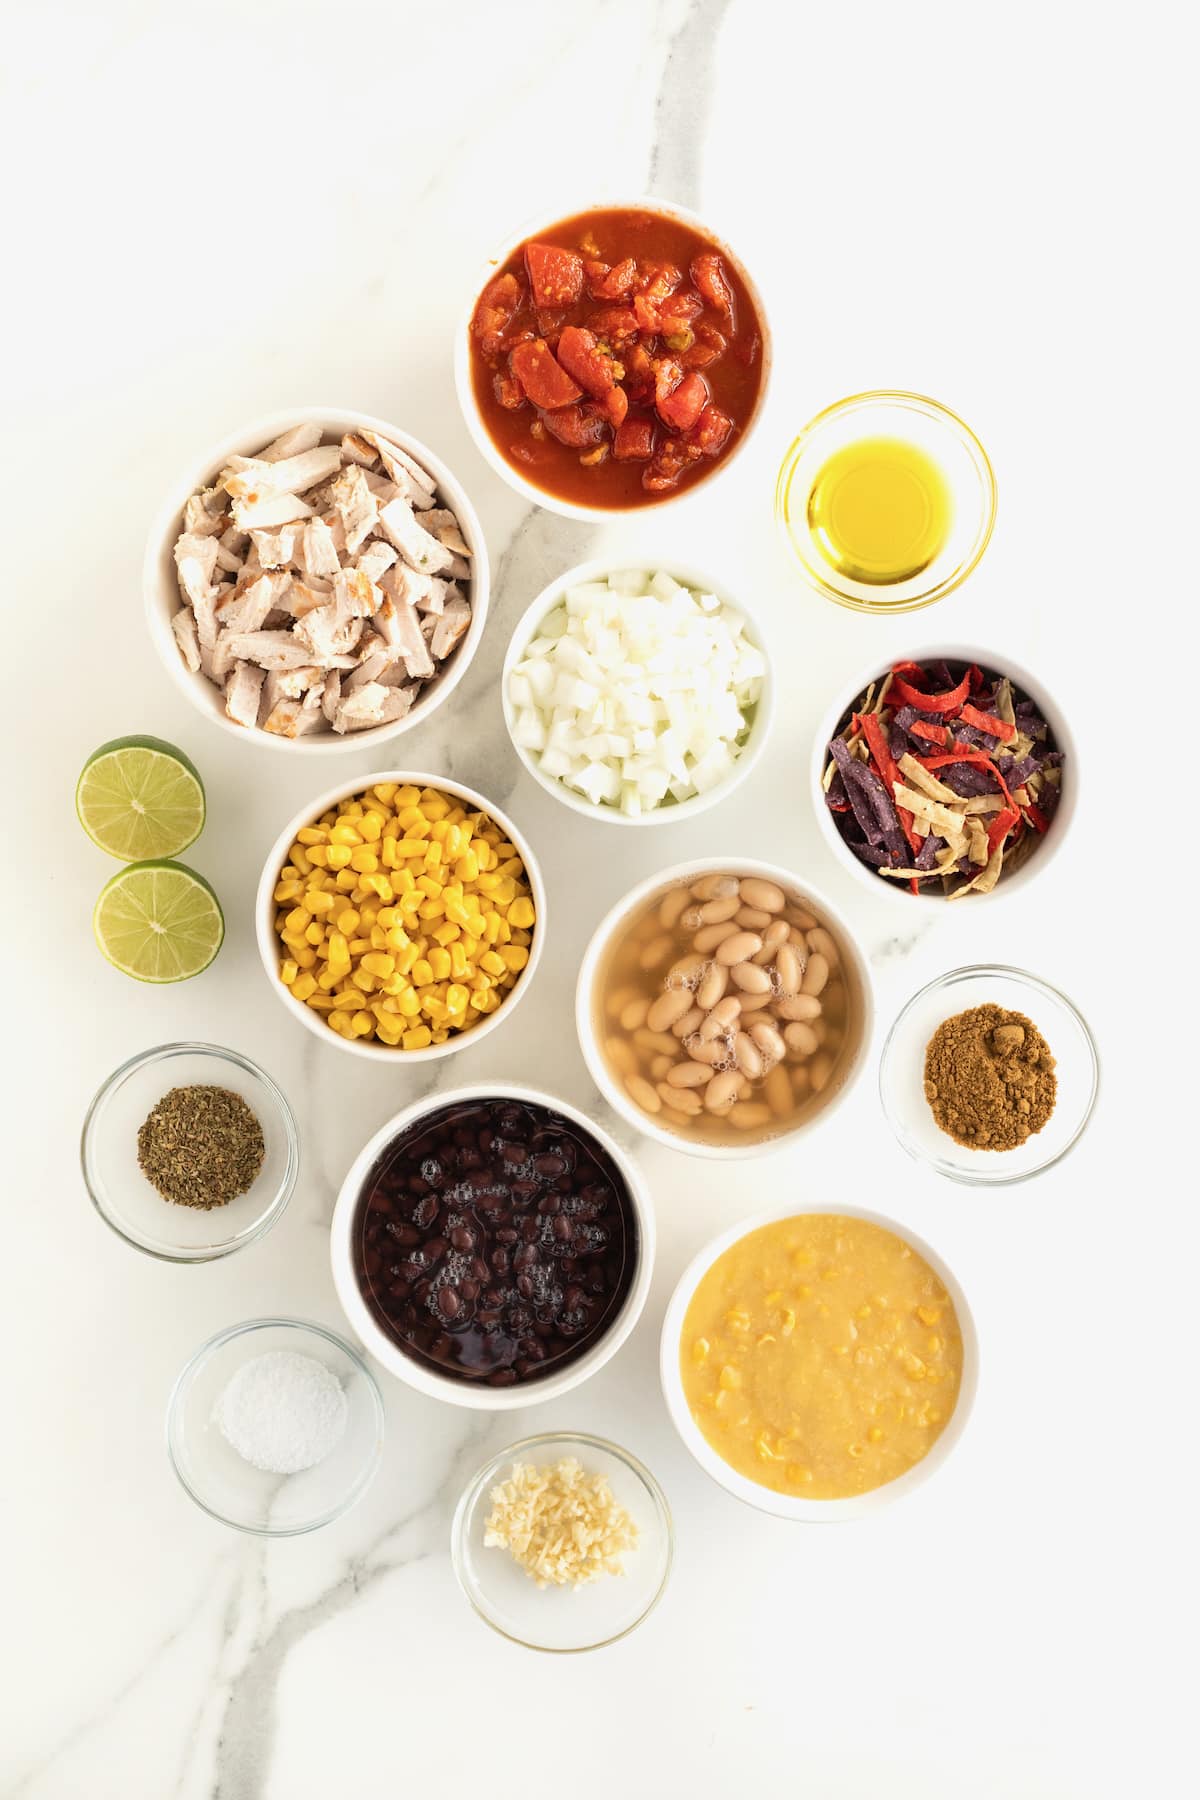 All the ingredients to make chicken tortilla soup in small glass containers on a white counter.